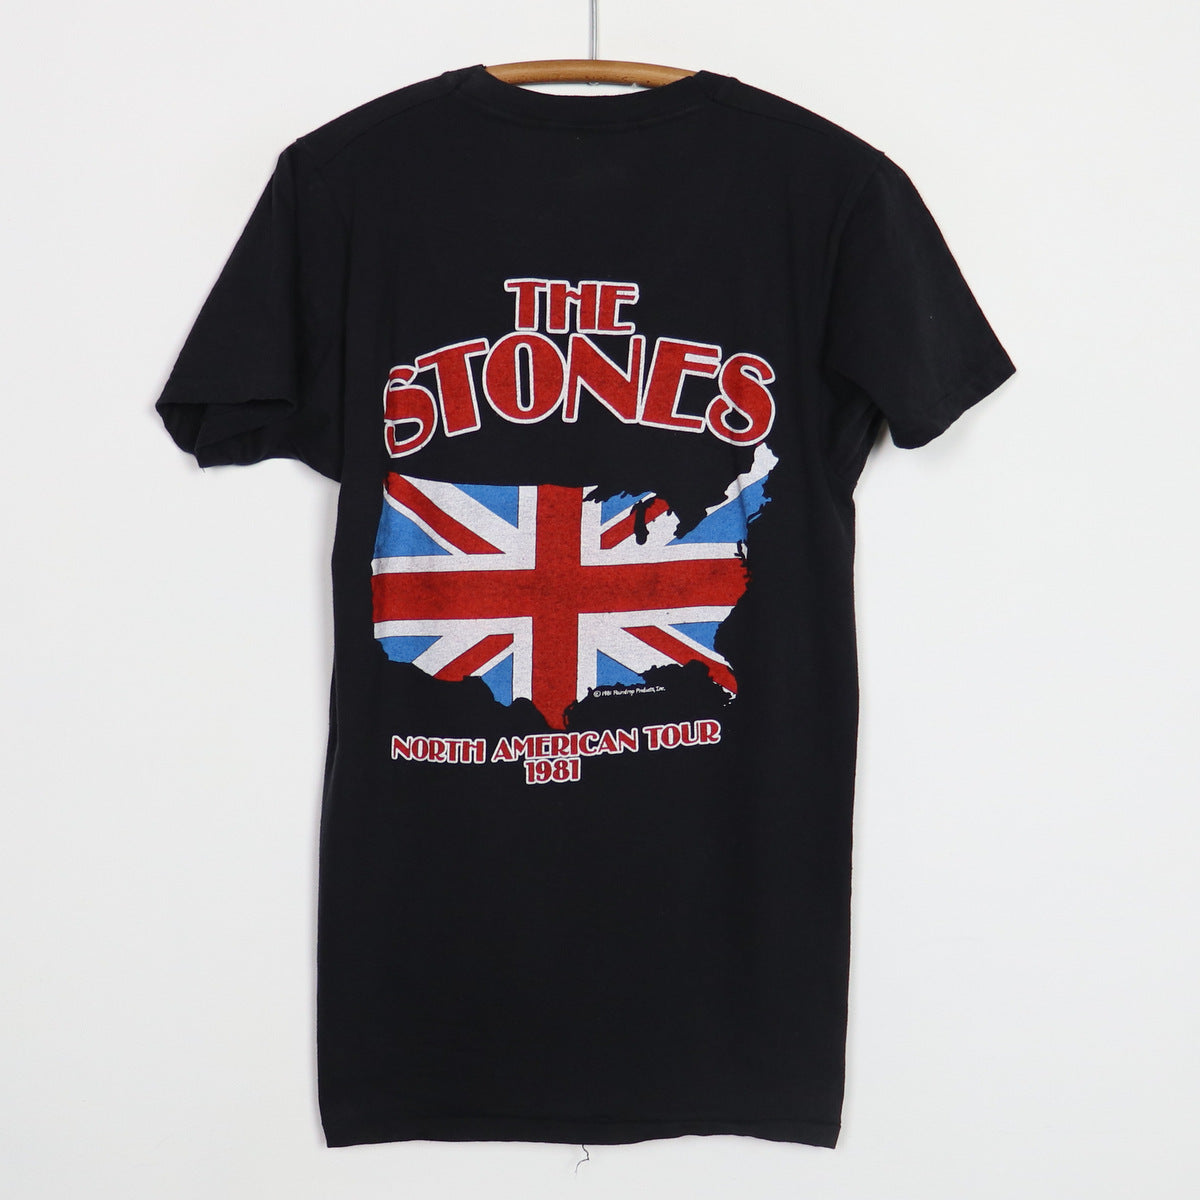 1981 Rolling Stones North American Tour Shirt